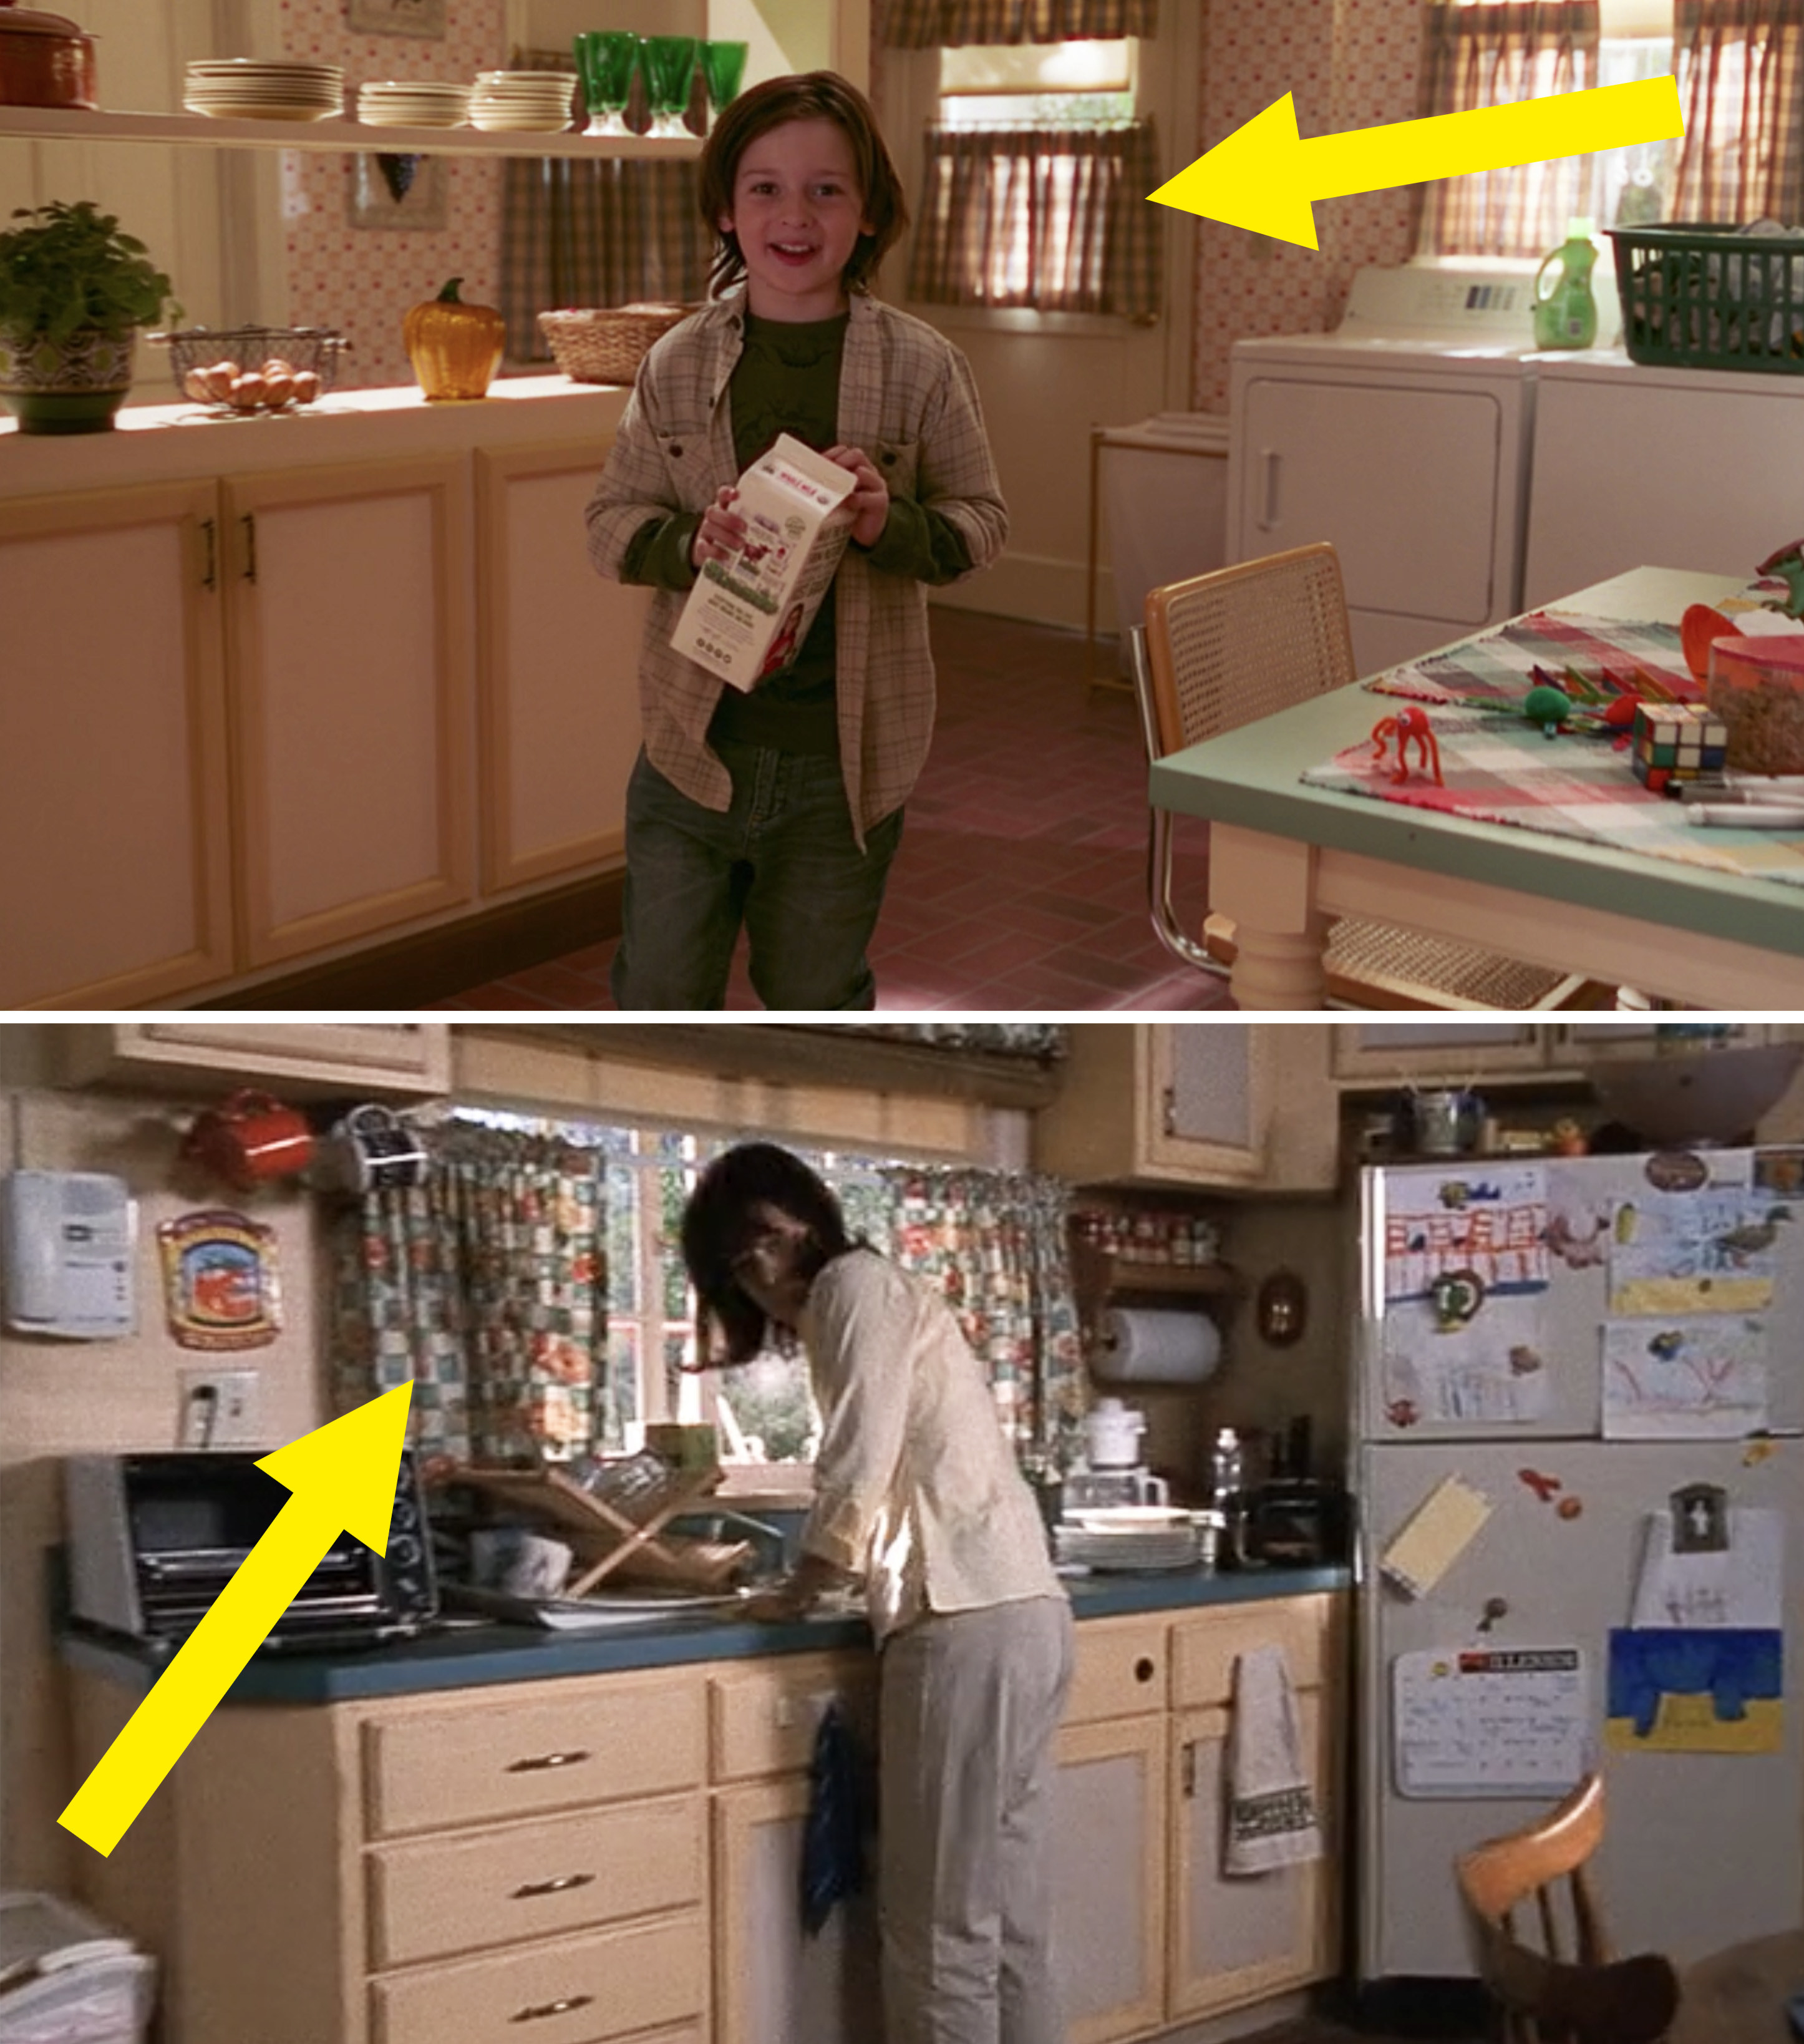 Arrows pointing to the similar curtains on the kitchen windows in WandaVision and Malcolm in the Middle